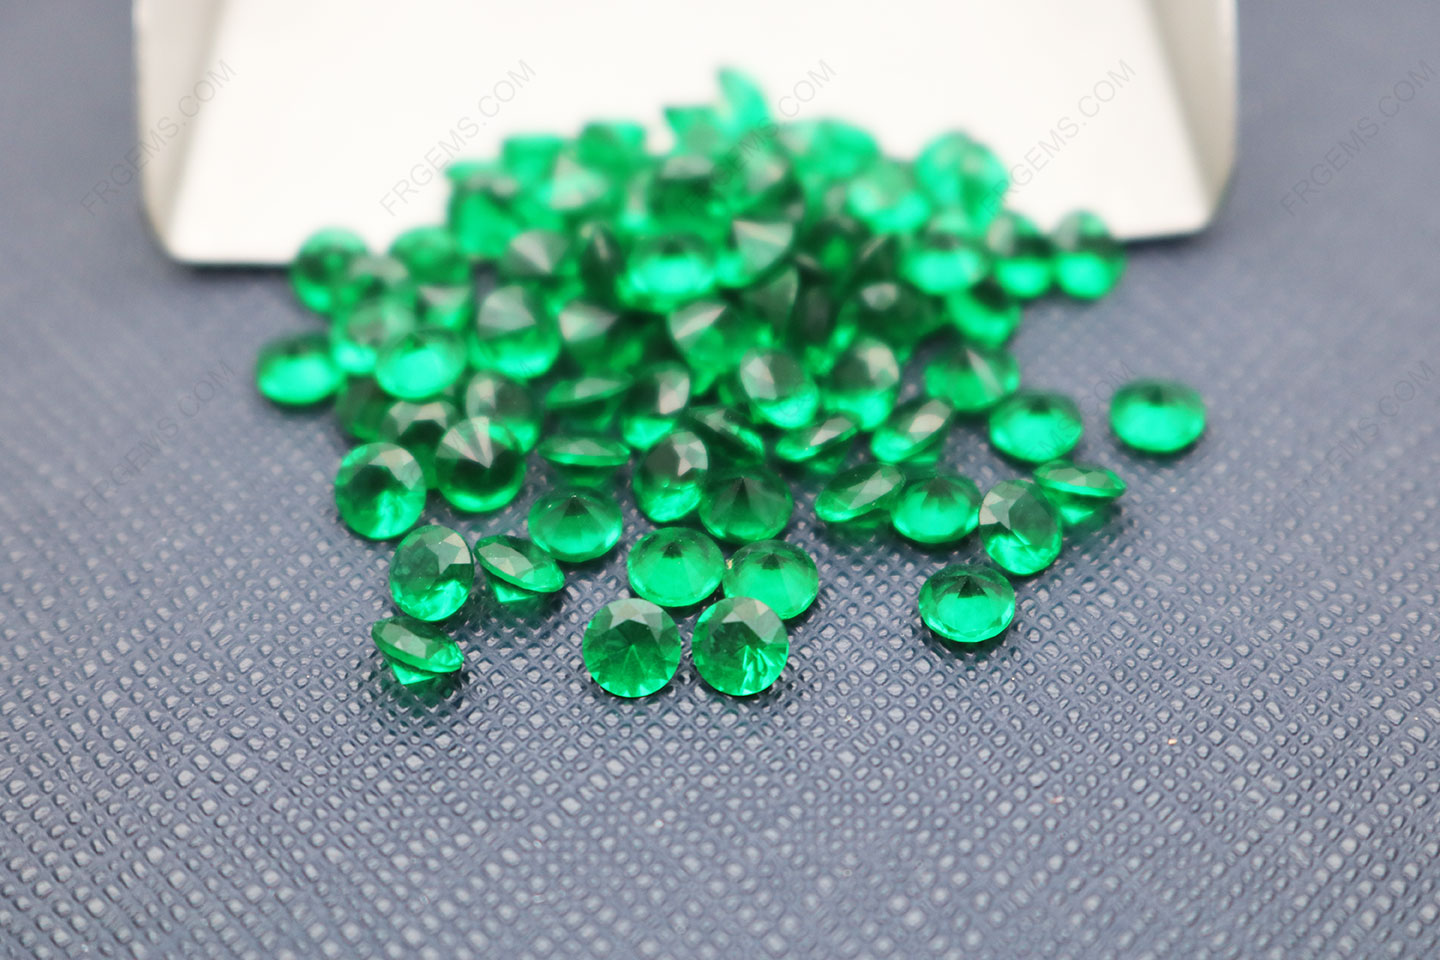 China Loose Glass Emerald Green Color BG01 Round Shape Faceted Cut 4mm Gemstones